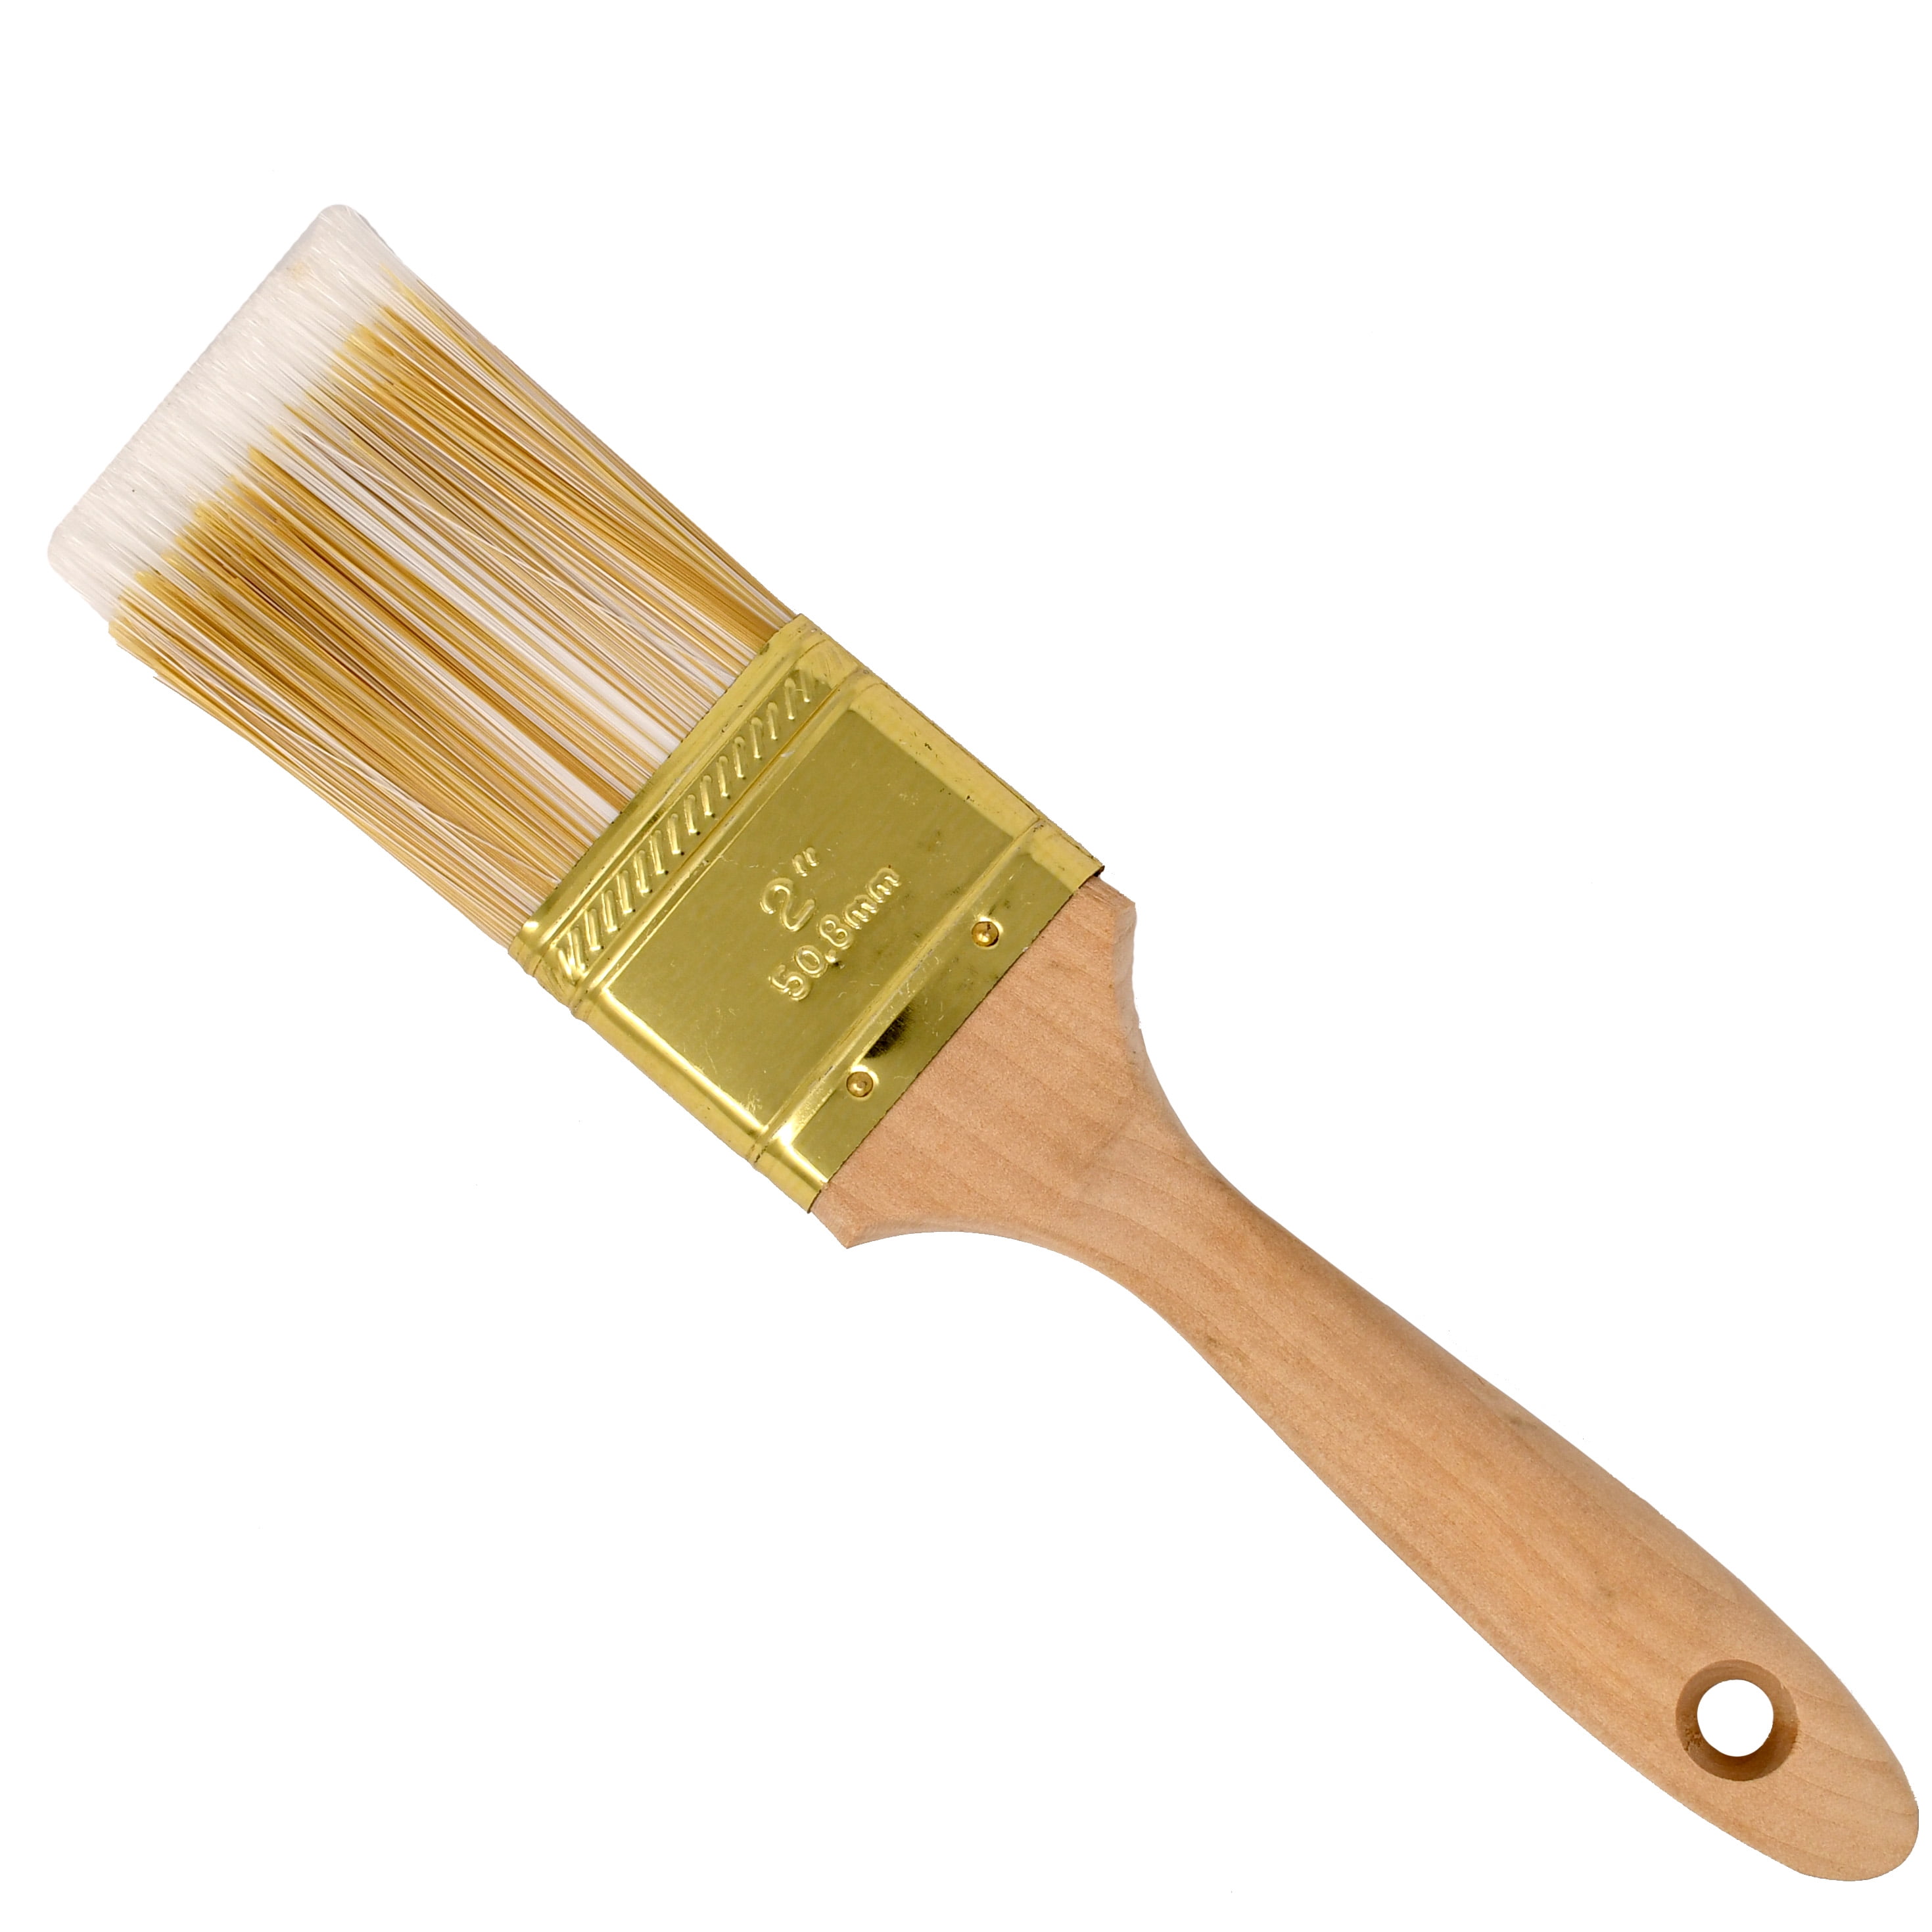 Pb2p-unb 2 In. Flat-cut Polyester Paint Brush With Wooden Handle For Home Exterior Or Interior